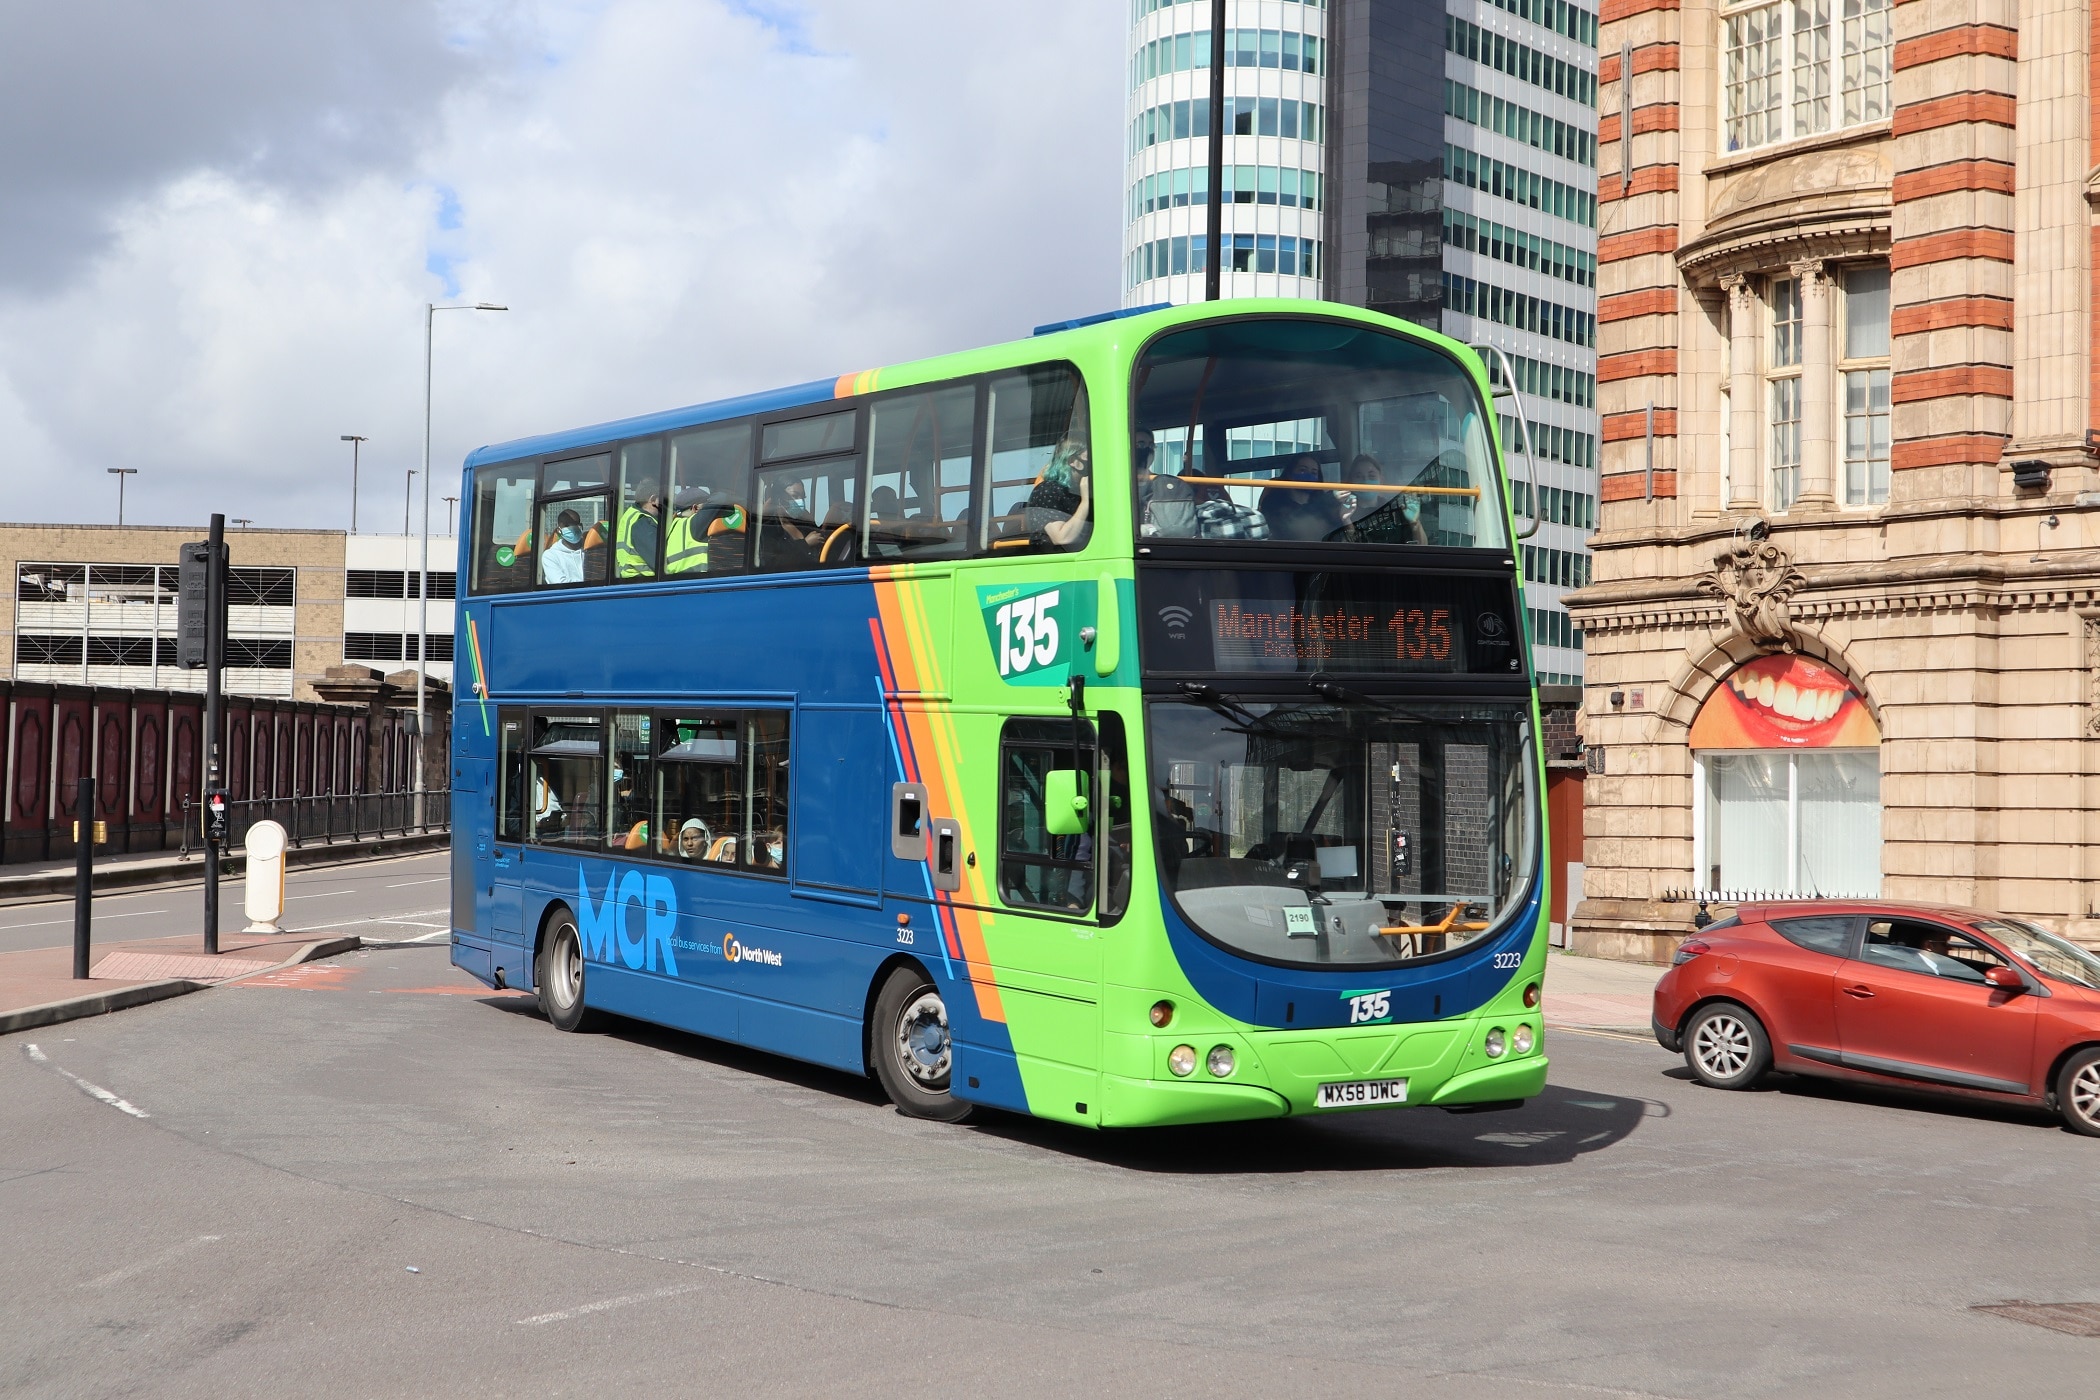 Bus service adjustments in England post-BRG inevitable, Transport Select Committee told